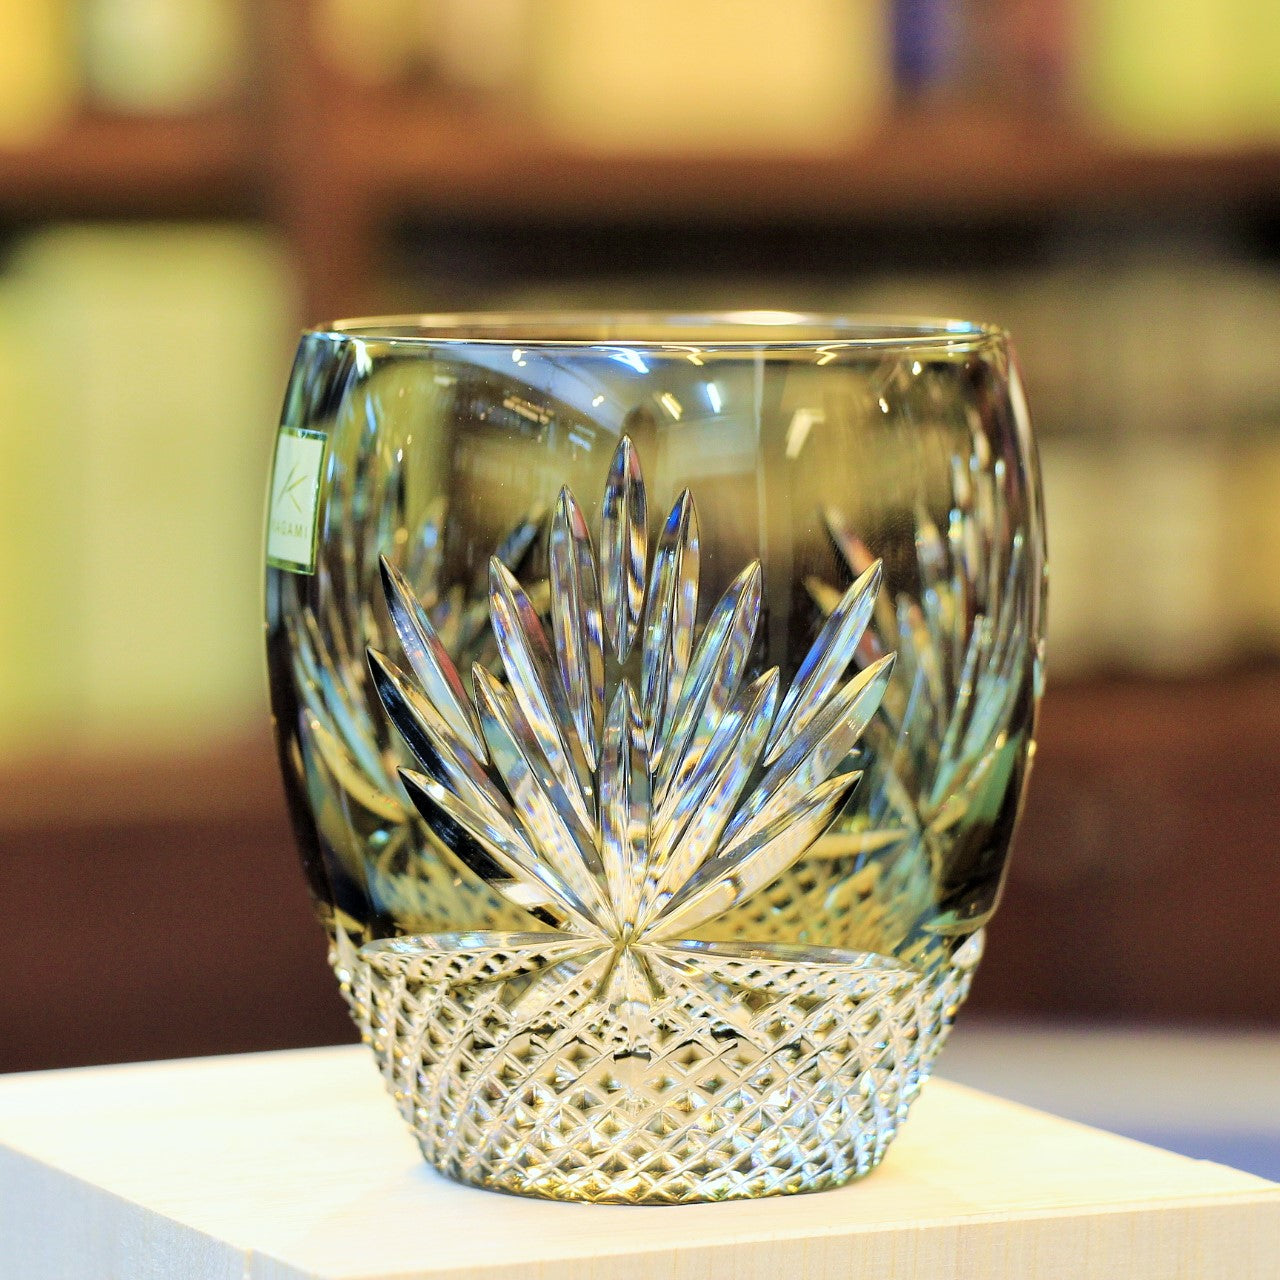 This beautiful hand cut glass comes in a wooden gift box. Perfect for enjoying a glass of whisky either straight up or on the rocks! Also perfect for other iced drinks. "HANA series" is an adaptation of Kiriko featuring neat white flowers against subtle black backdrop. The cutting portrays imagery of the "Queen of the Night."